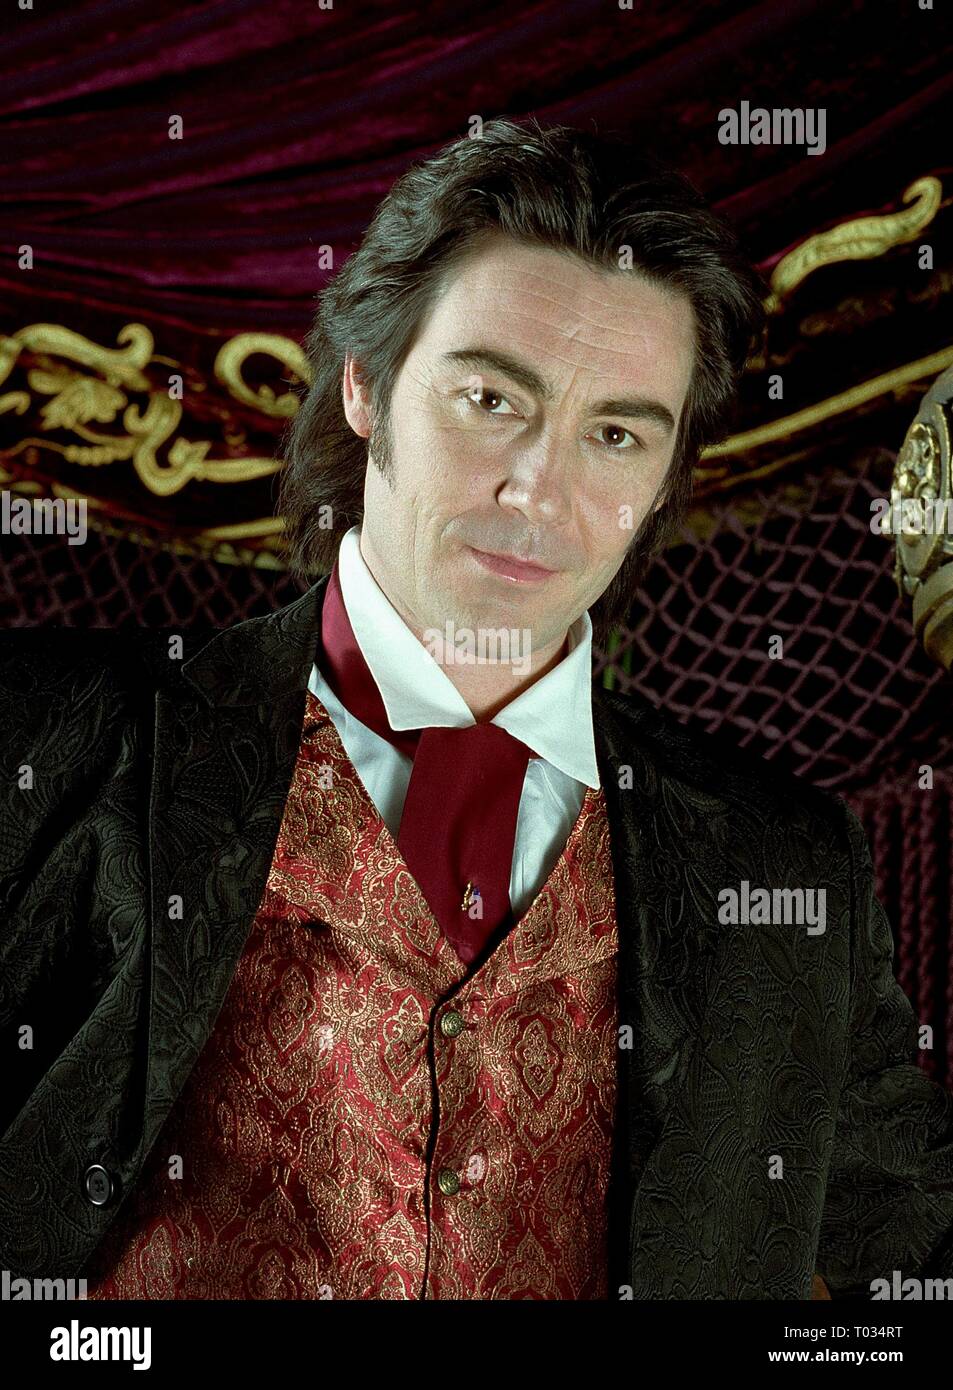 Nathaniel Parker High Resolution Stock Photography and Images - Alamy